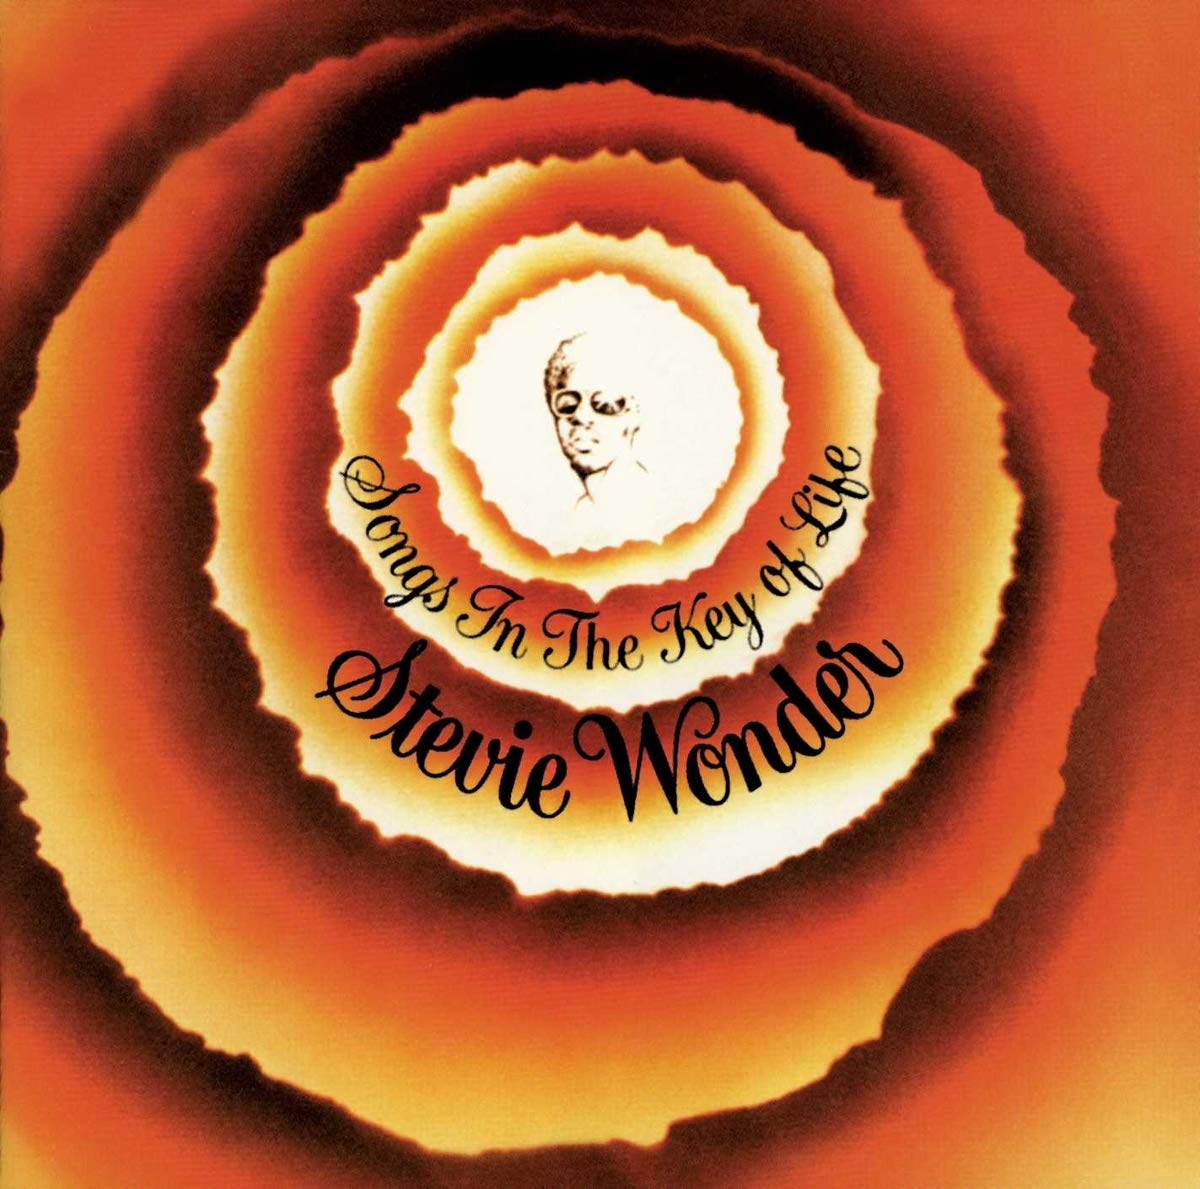 cover of Stevie Wonder's "Songs in the Key of Life"